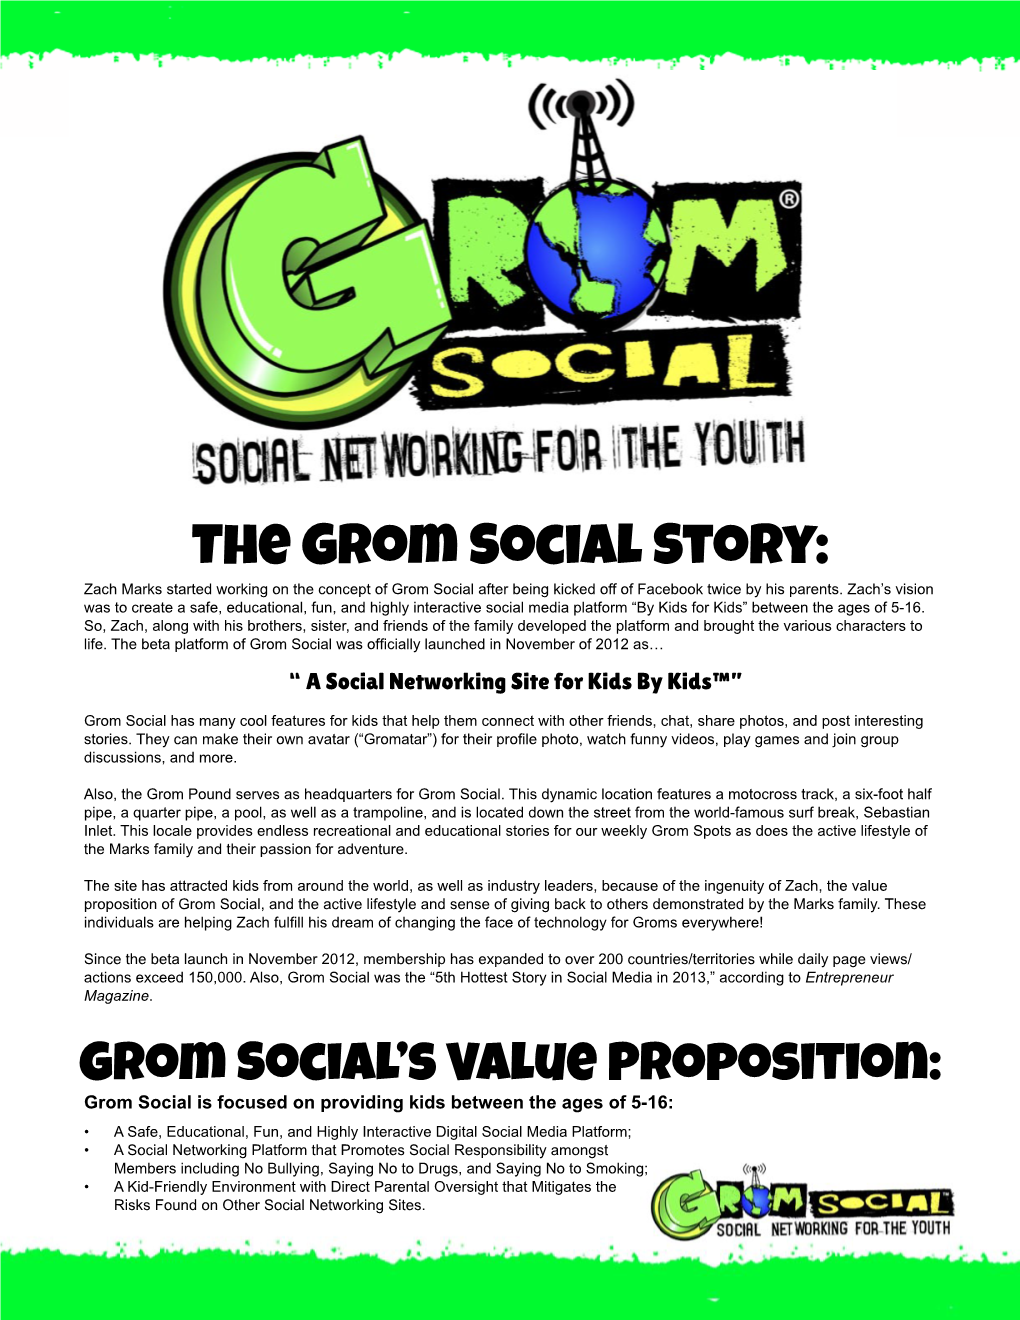 The Grom Social Story: Zach Marks Started Working on the Concept of Grom Social After Being Kicked Off of Facebook Twice by His Parents